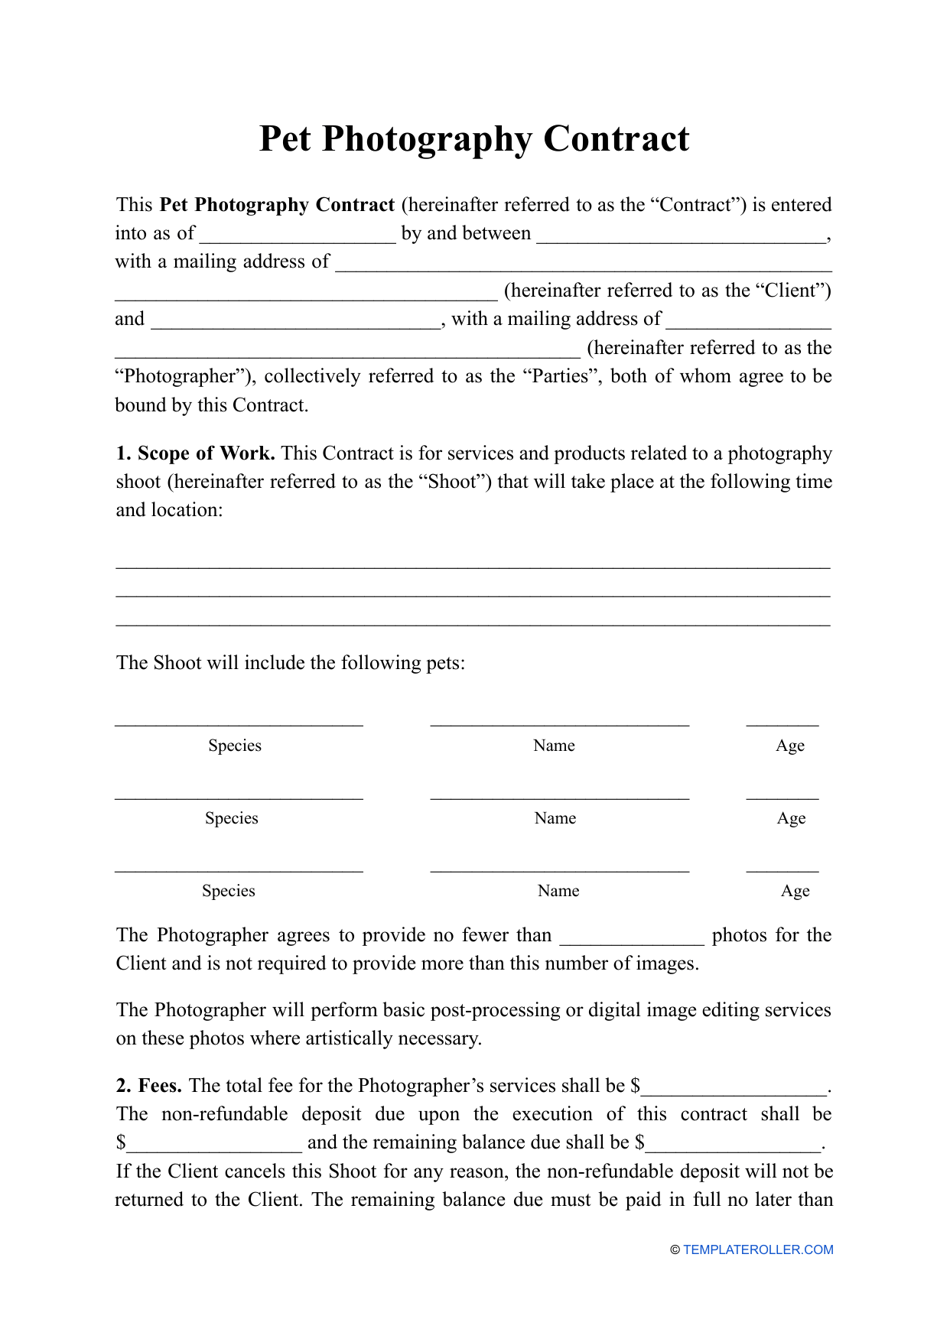 Pet Photography Contract Template, Page 1